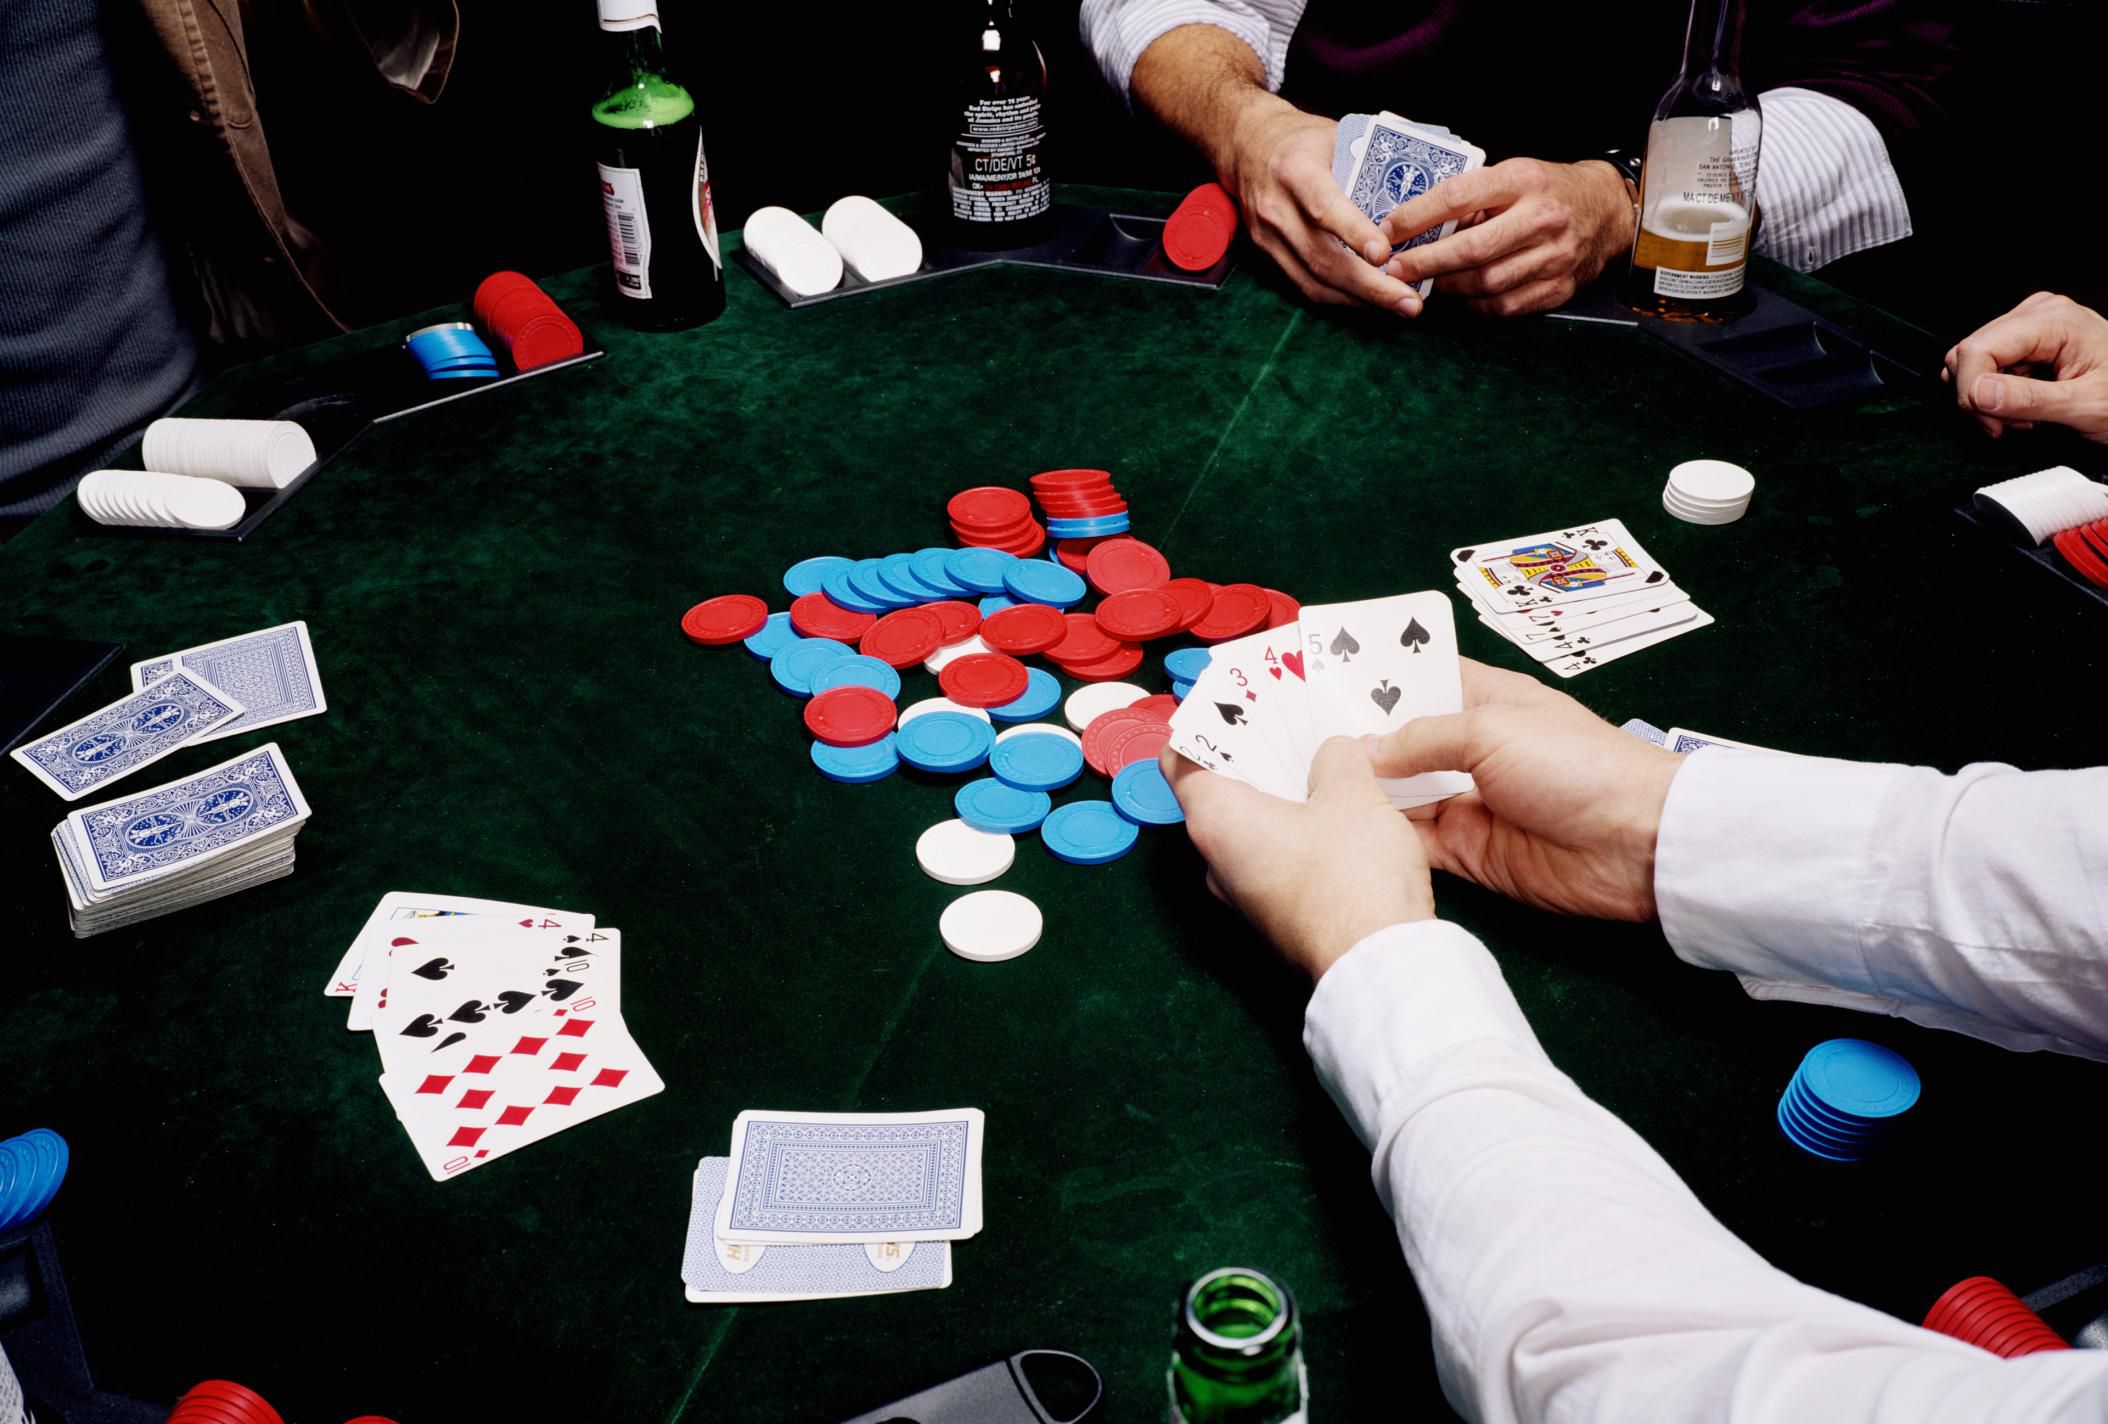 Research the important aspects of poker games